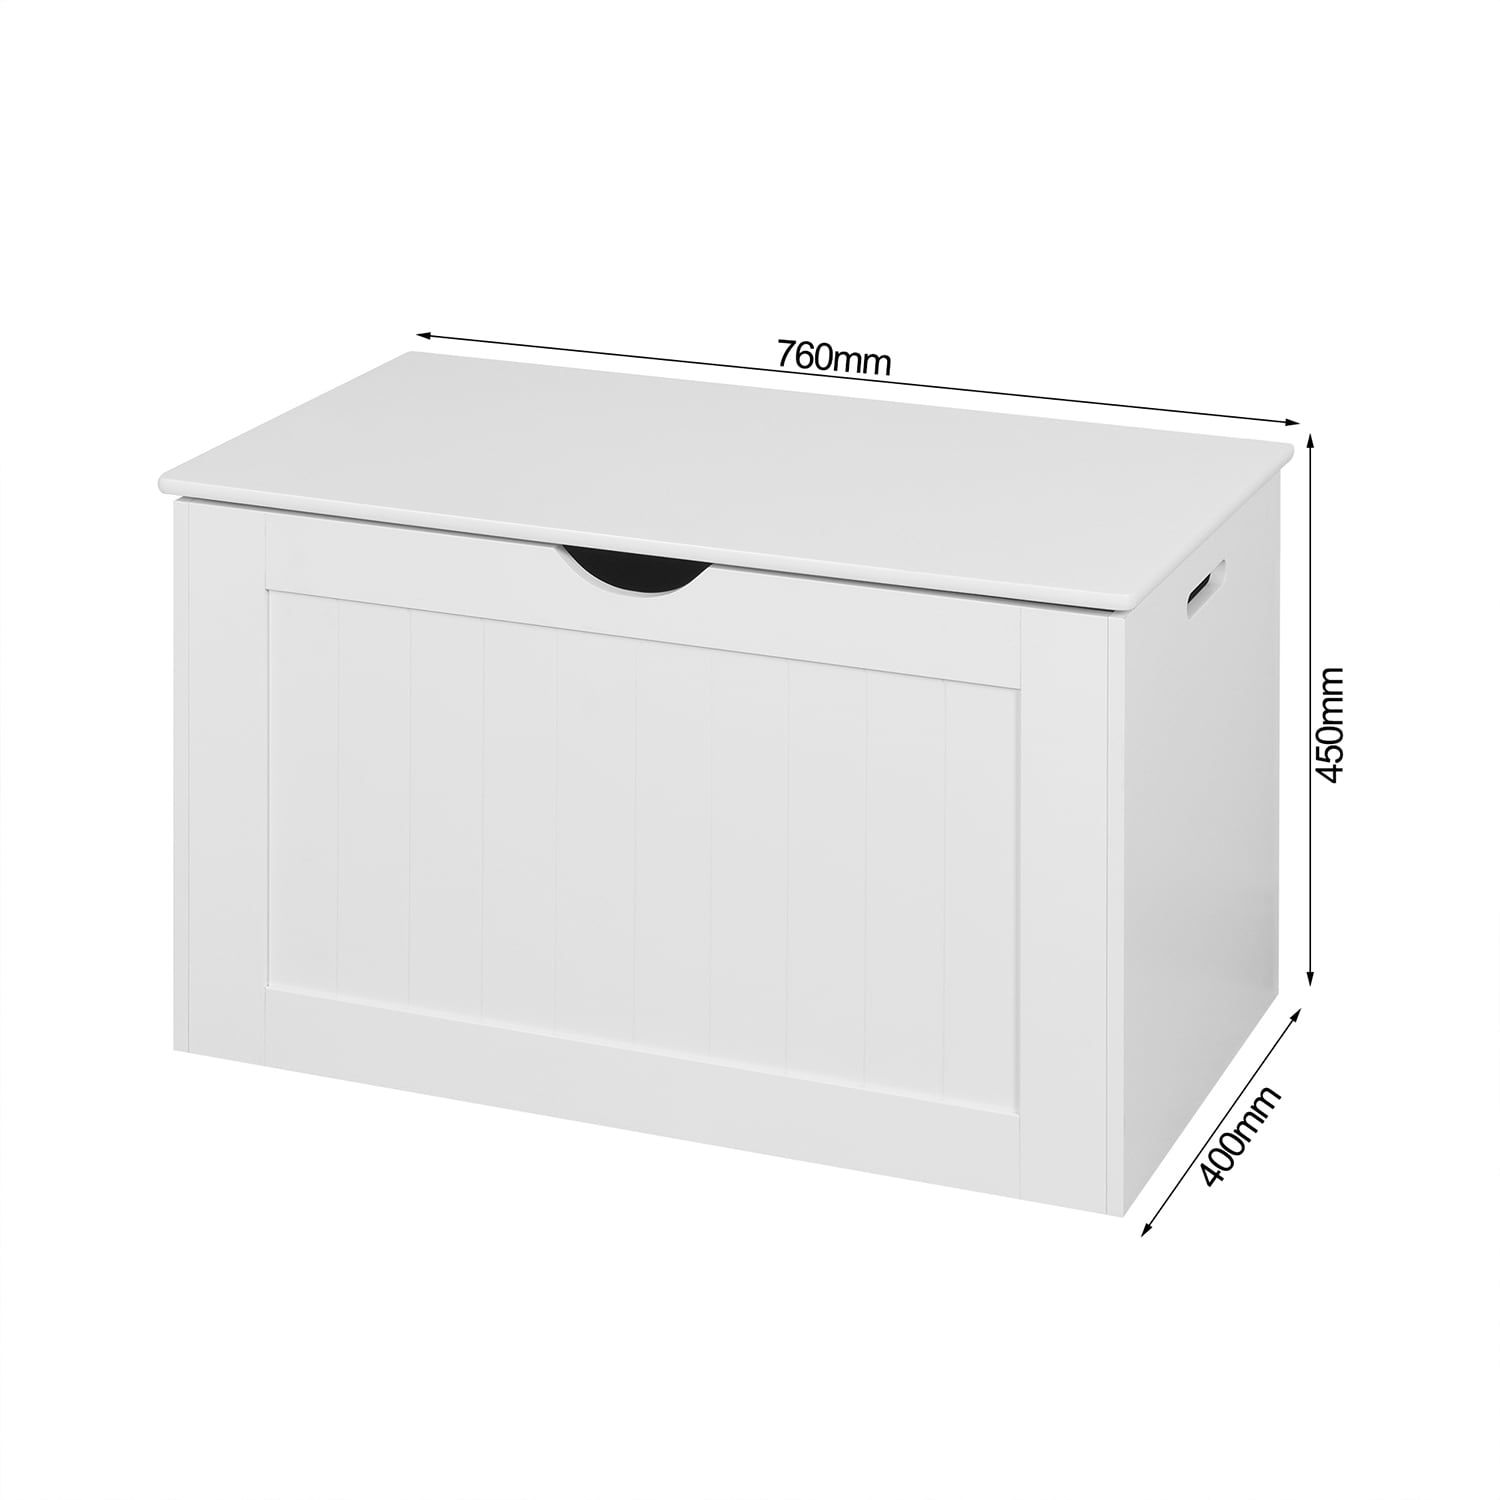 GZMR Wooden Toy Box White Rectangular Toy Box in the Toy Boxes ...